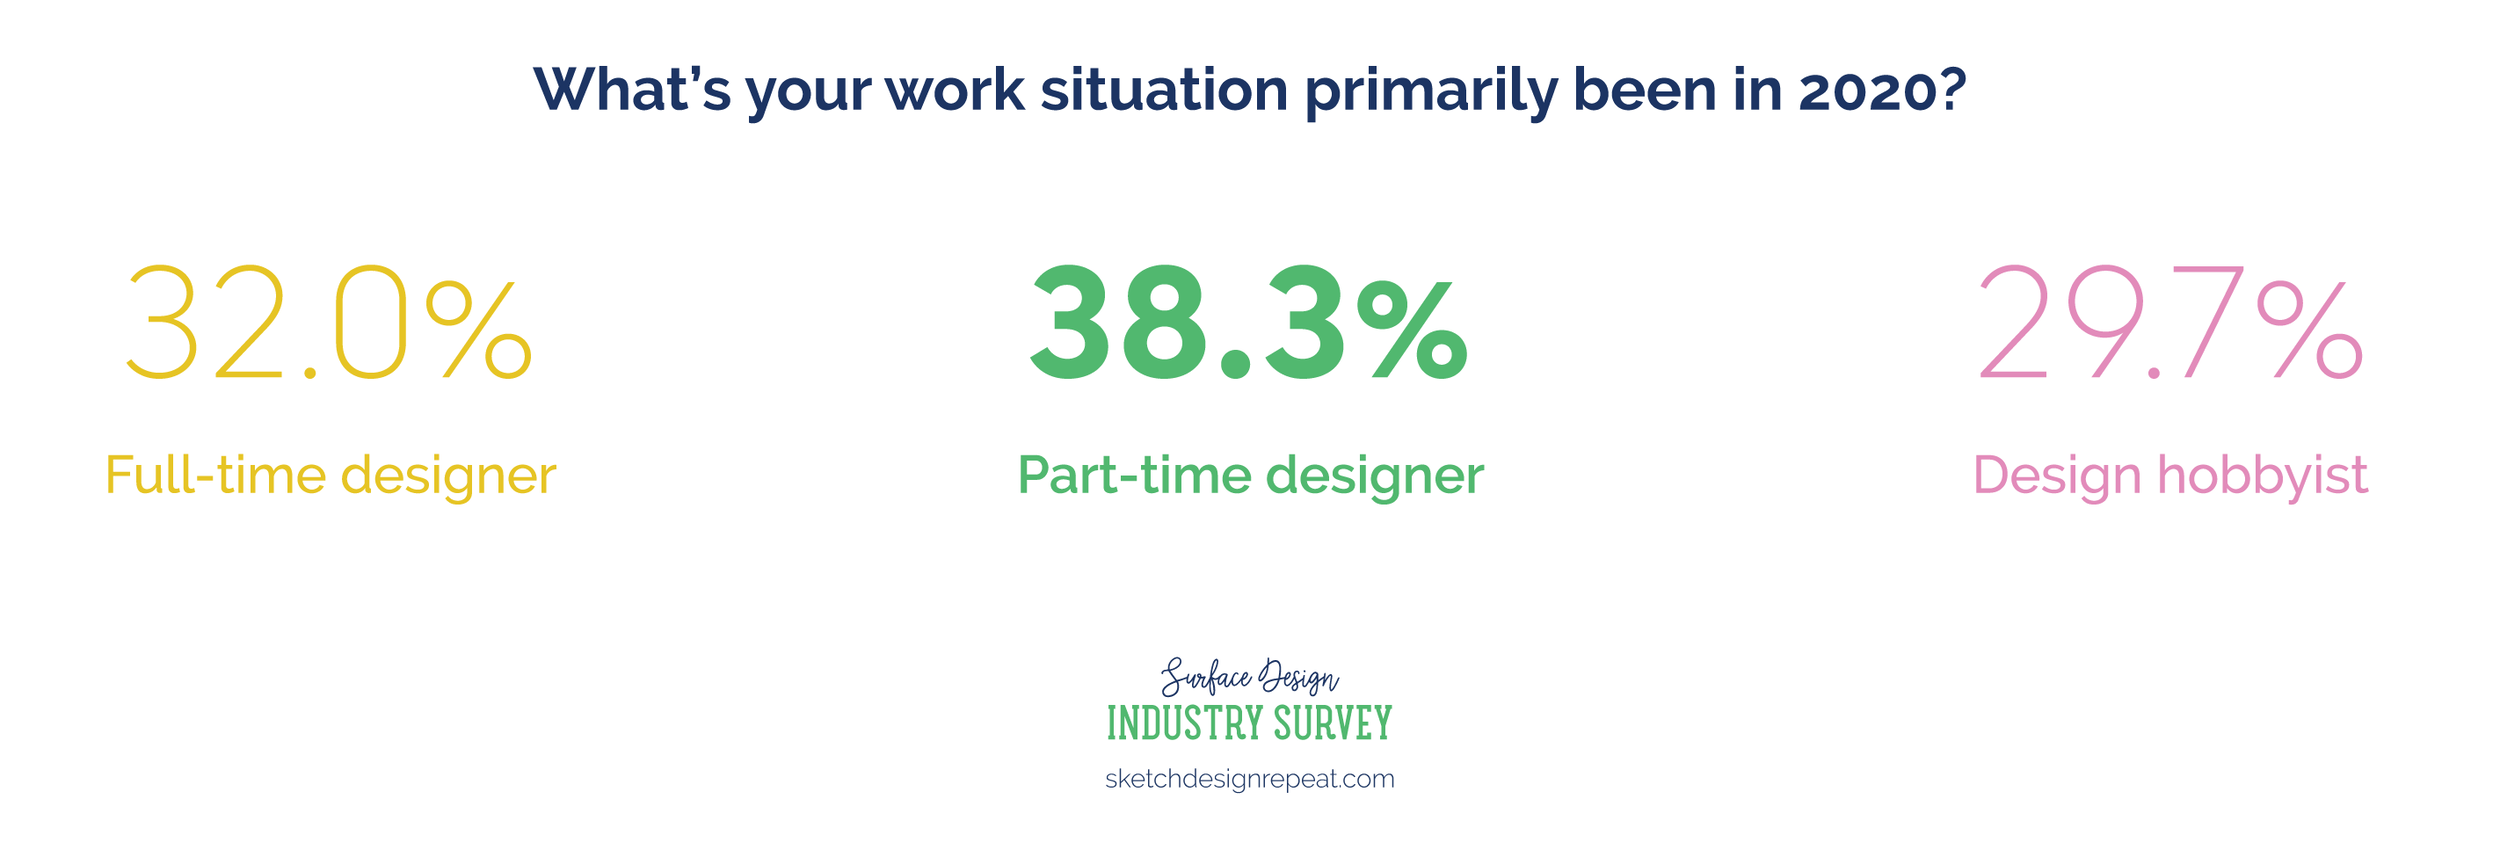 Surface Design Industry Survey 2020: work situation